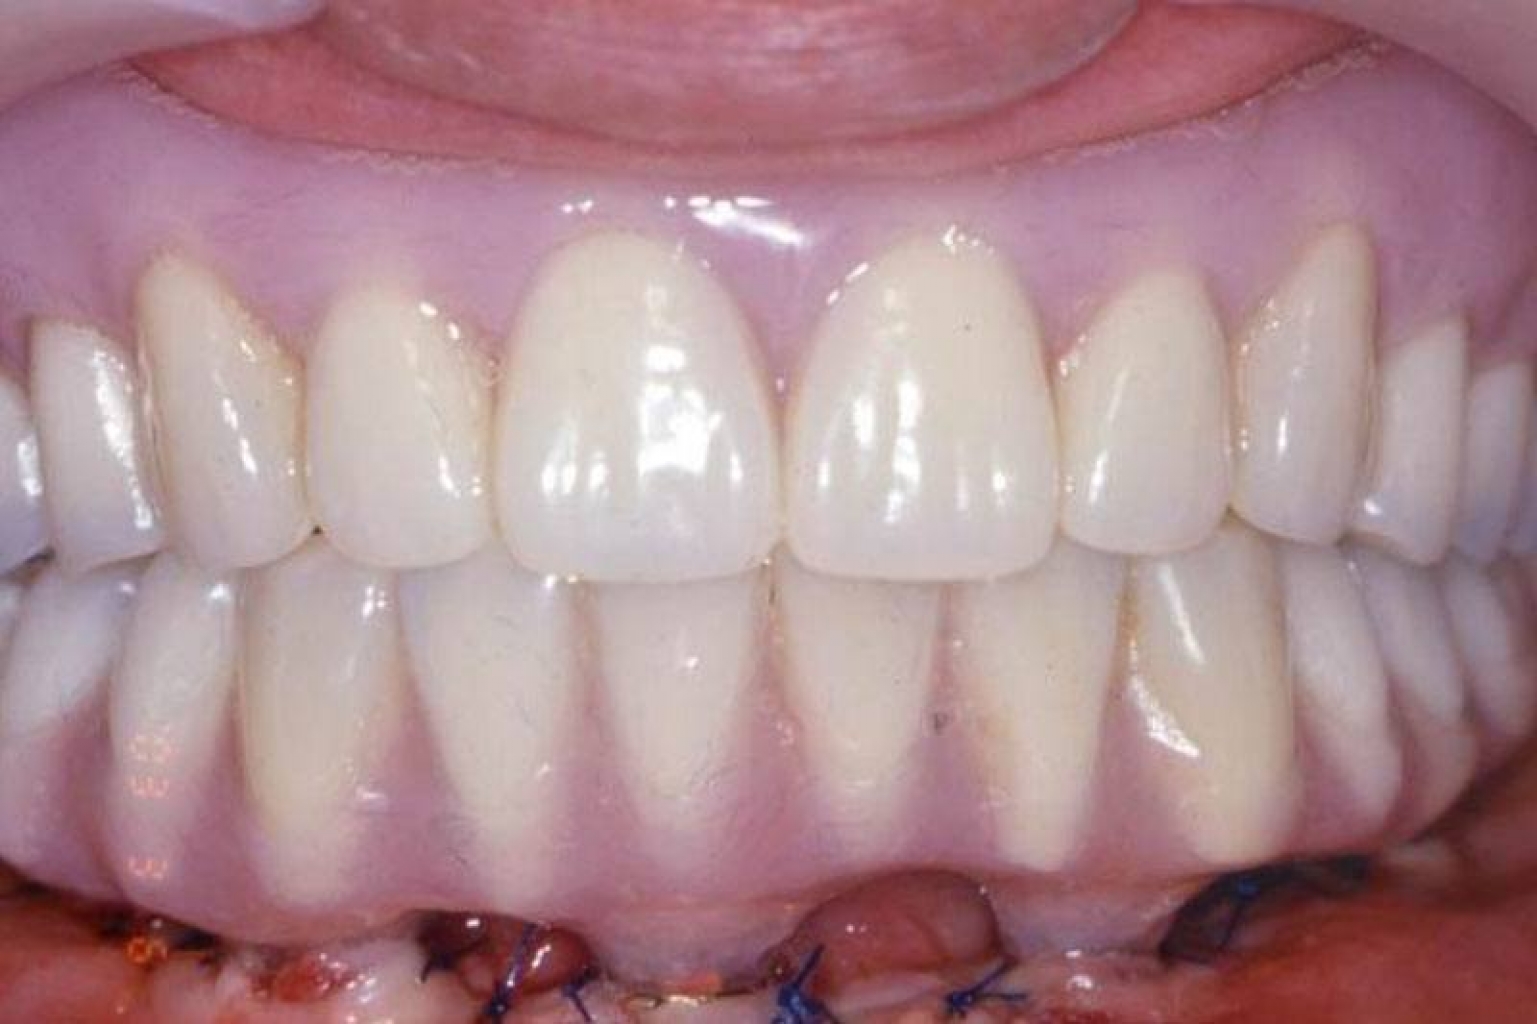 Our new patient came to us with an emergency issue. Dr. Choi fixed his issue chairside by restoring his existing dentures to ensure comfort and full range of utilization. Within a few short hours, he was happy and out the door issue-free!